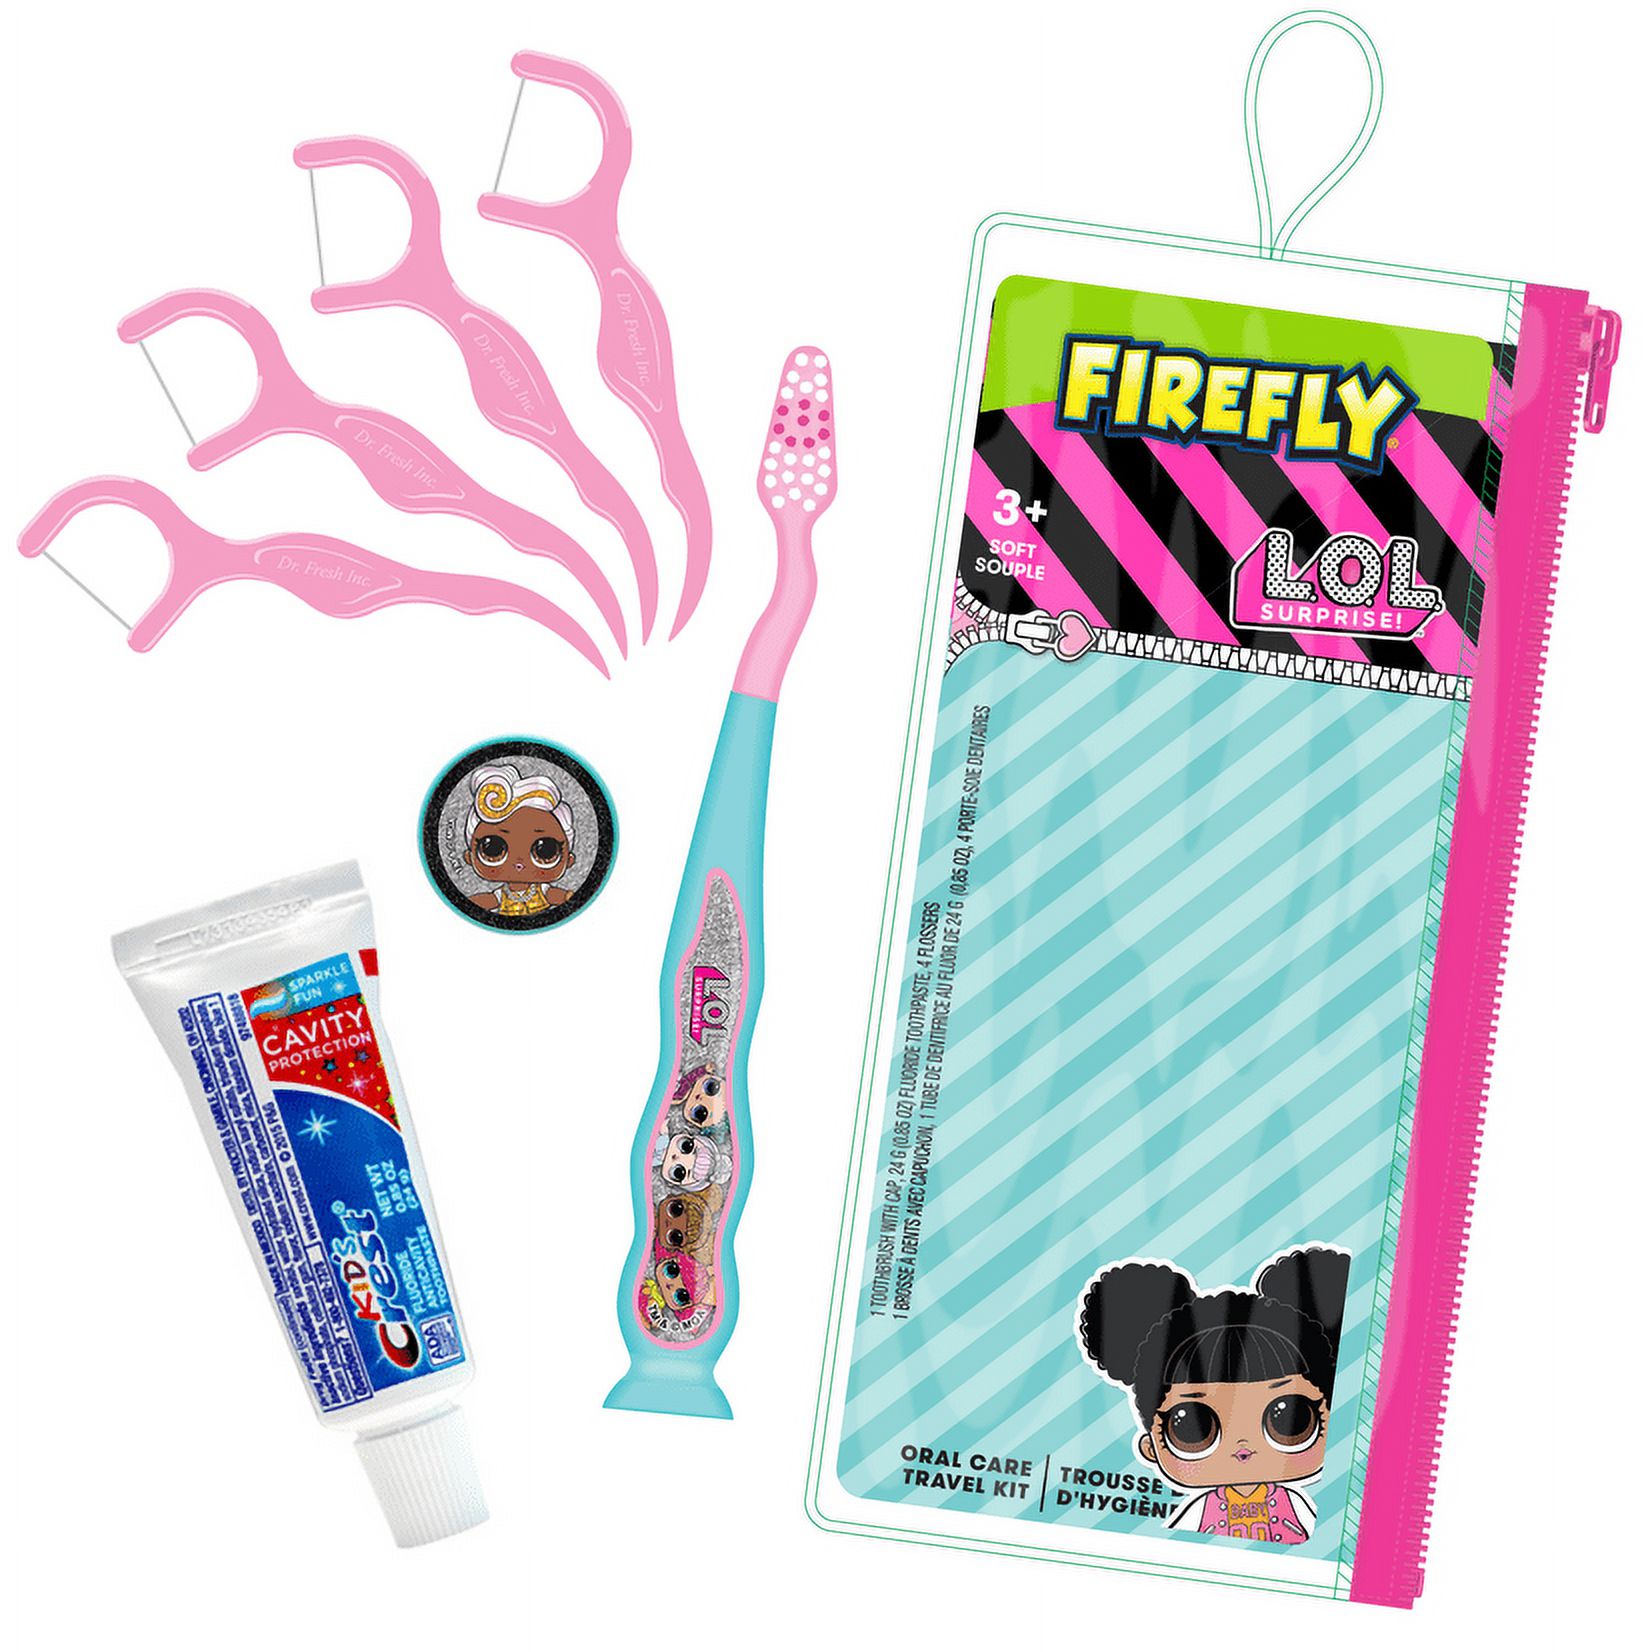 Firefly L.O.L. Surprise! Smile Value Pack - image 5 of 5